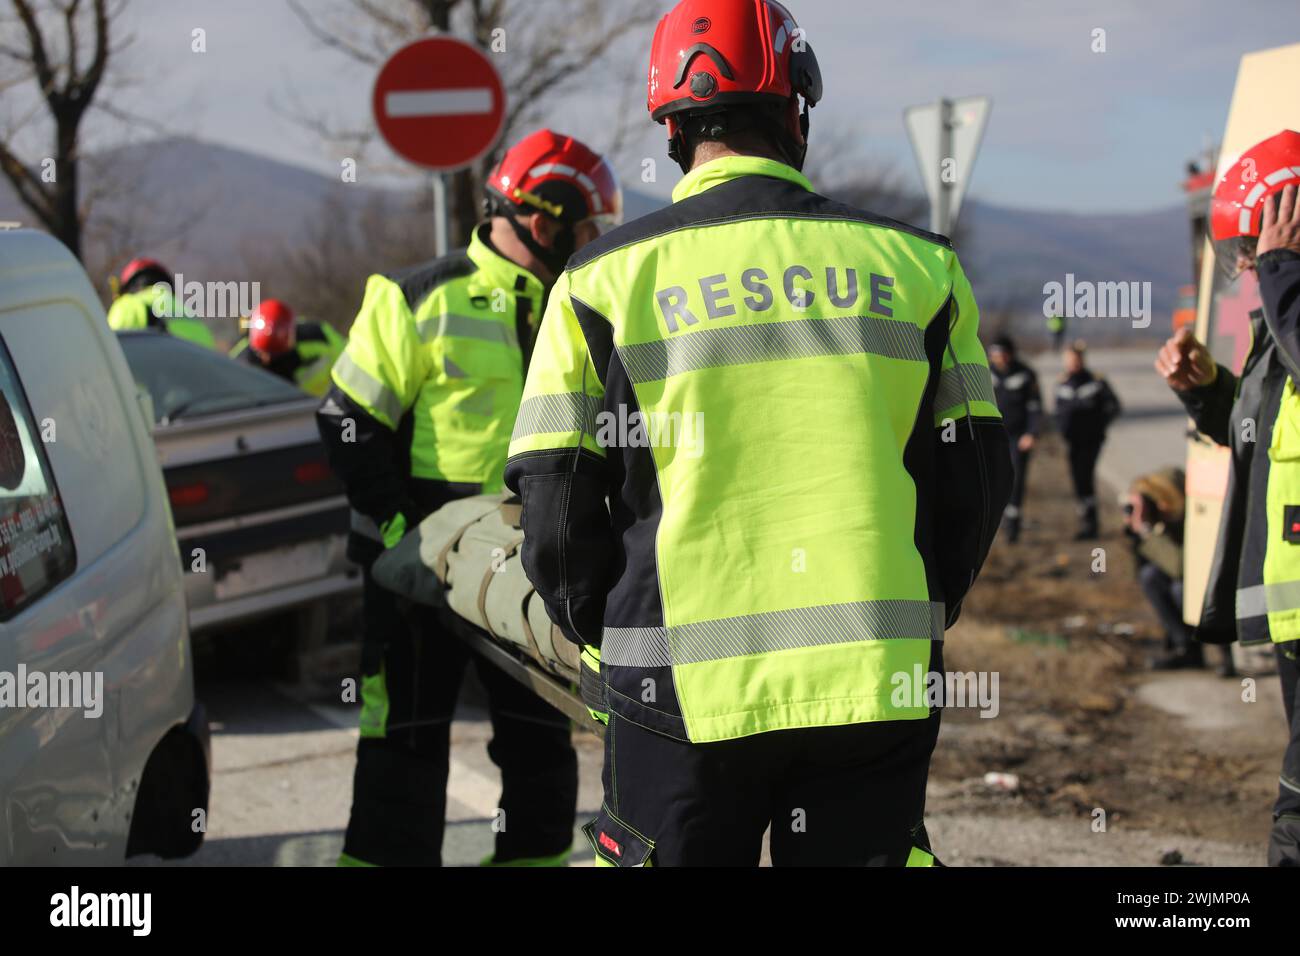 Fire and Rescue Imergency Units at car crash training on highway. Stock Photo